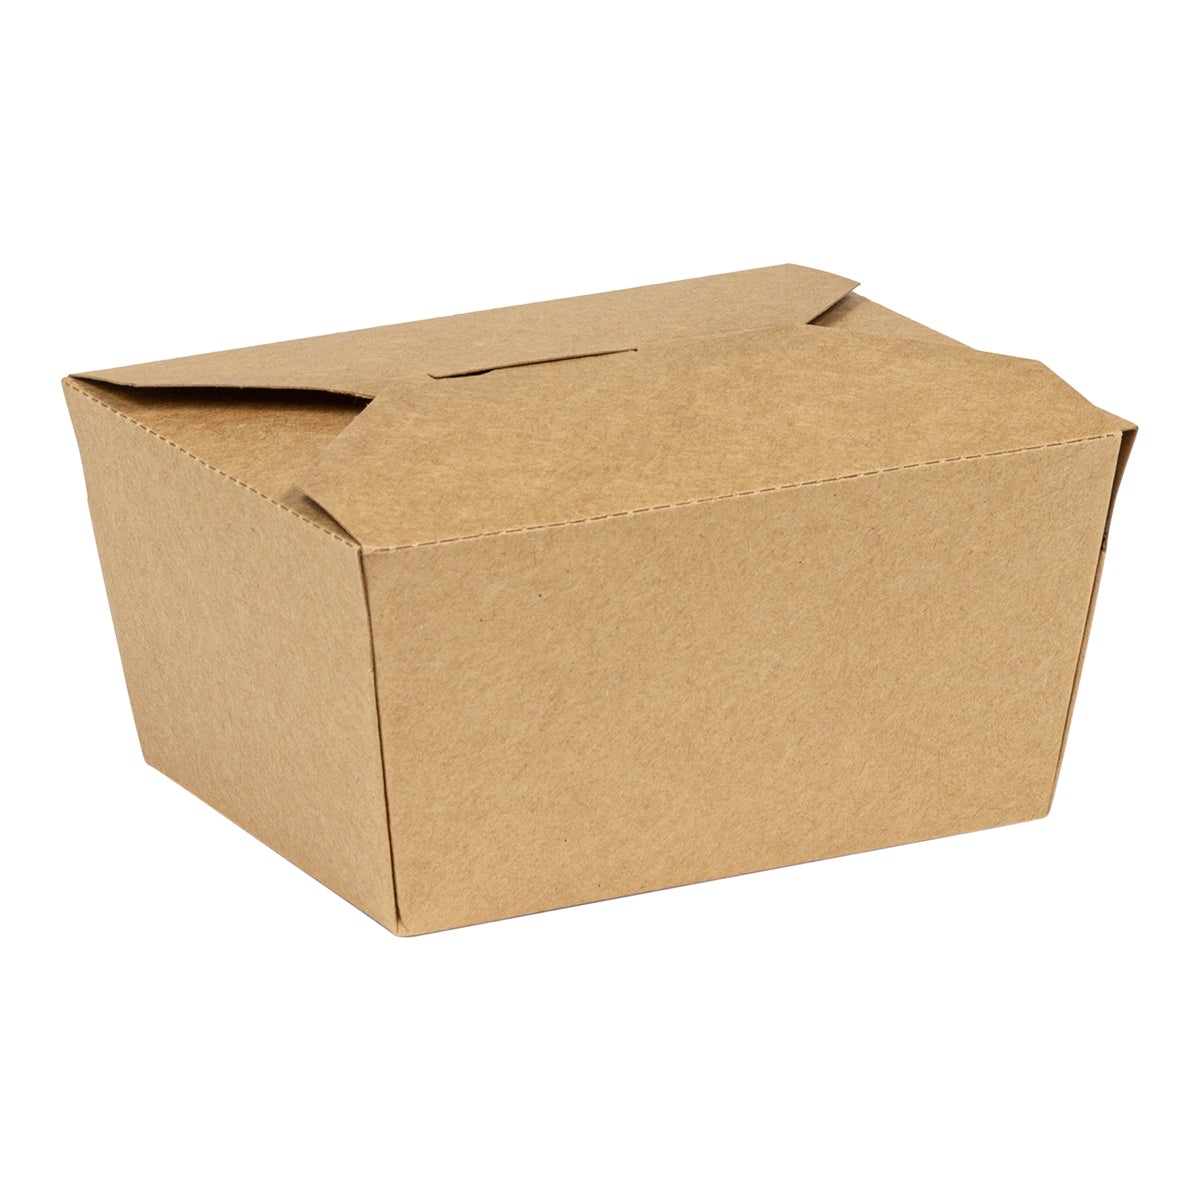 26 oz Recycled Kraft Paper Food Box | #1 Size (180 Case)